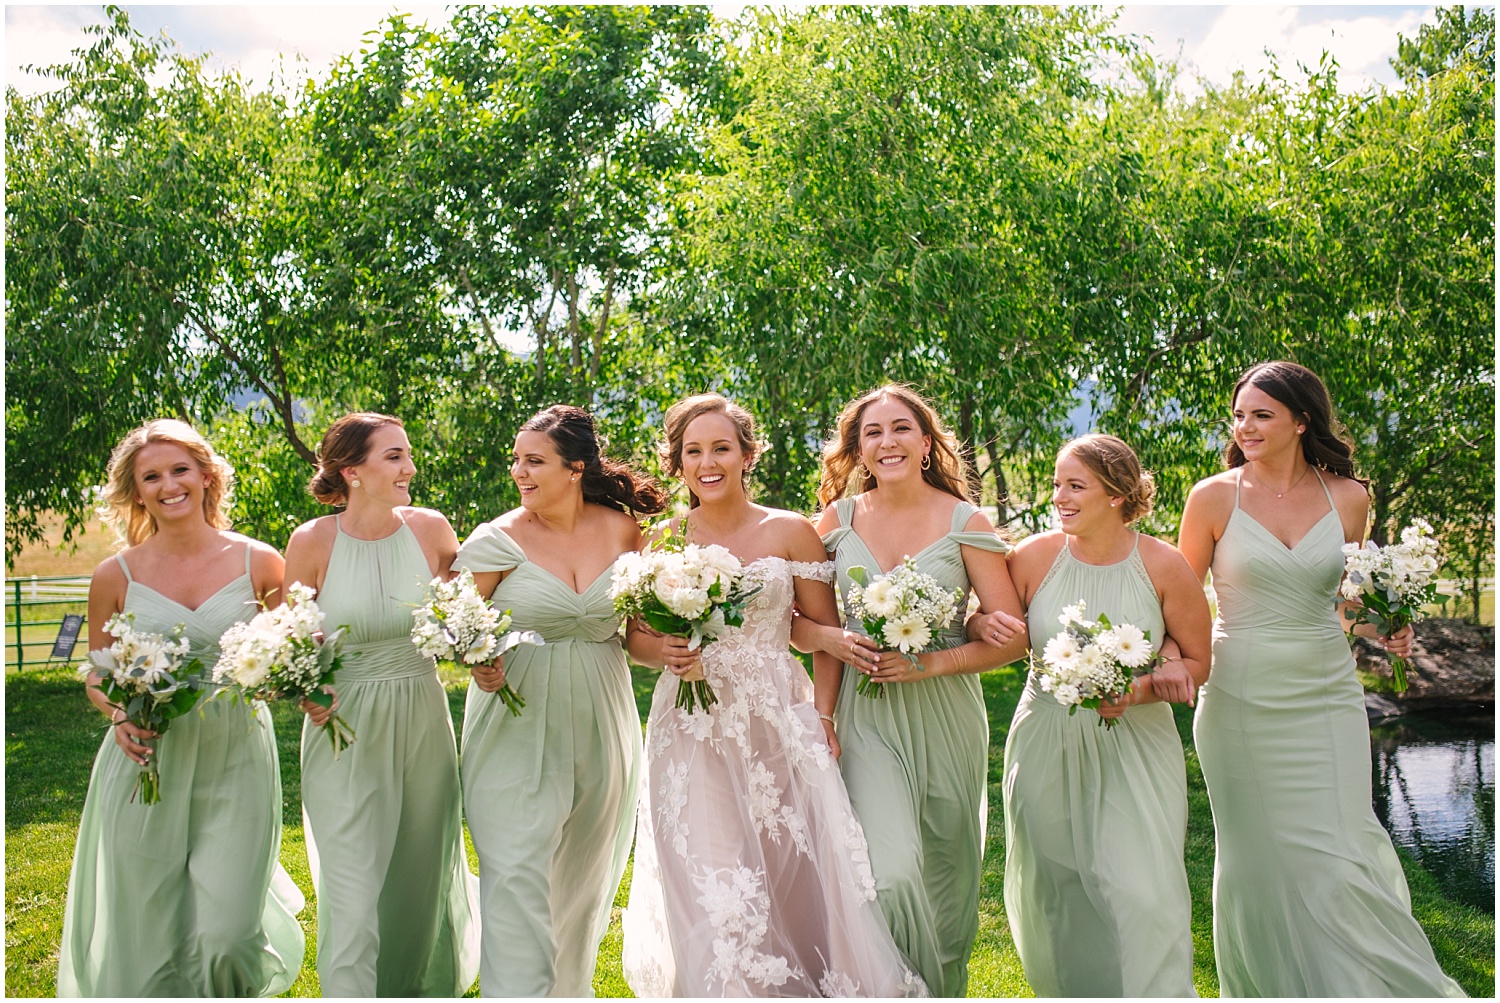 Bridesmaids in sage green dresses with white peony bouquets at Crooked Willow Farms wedding